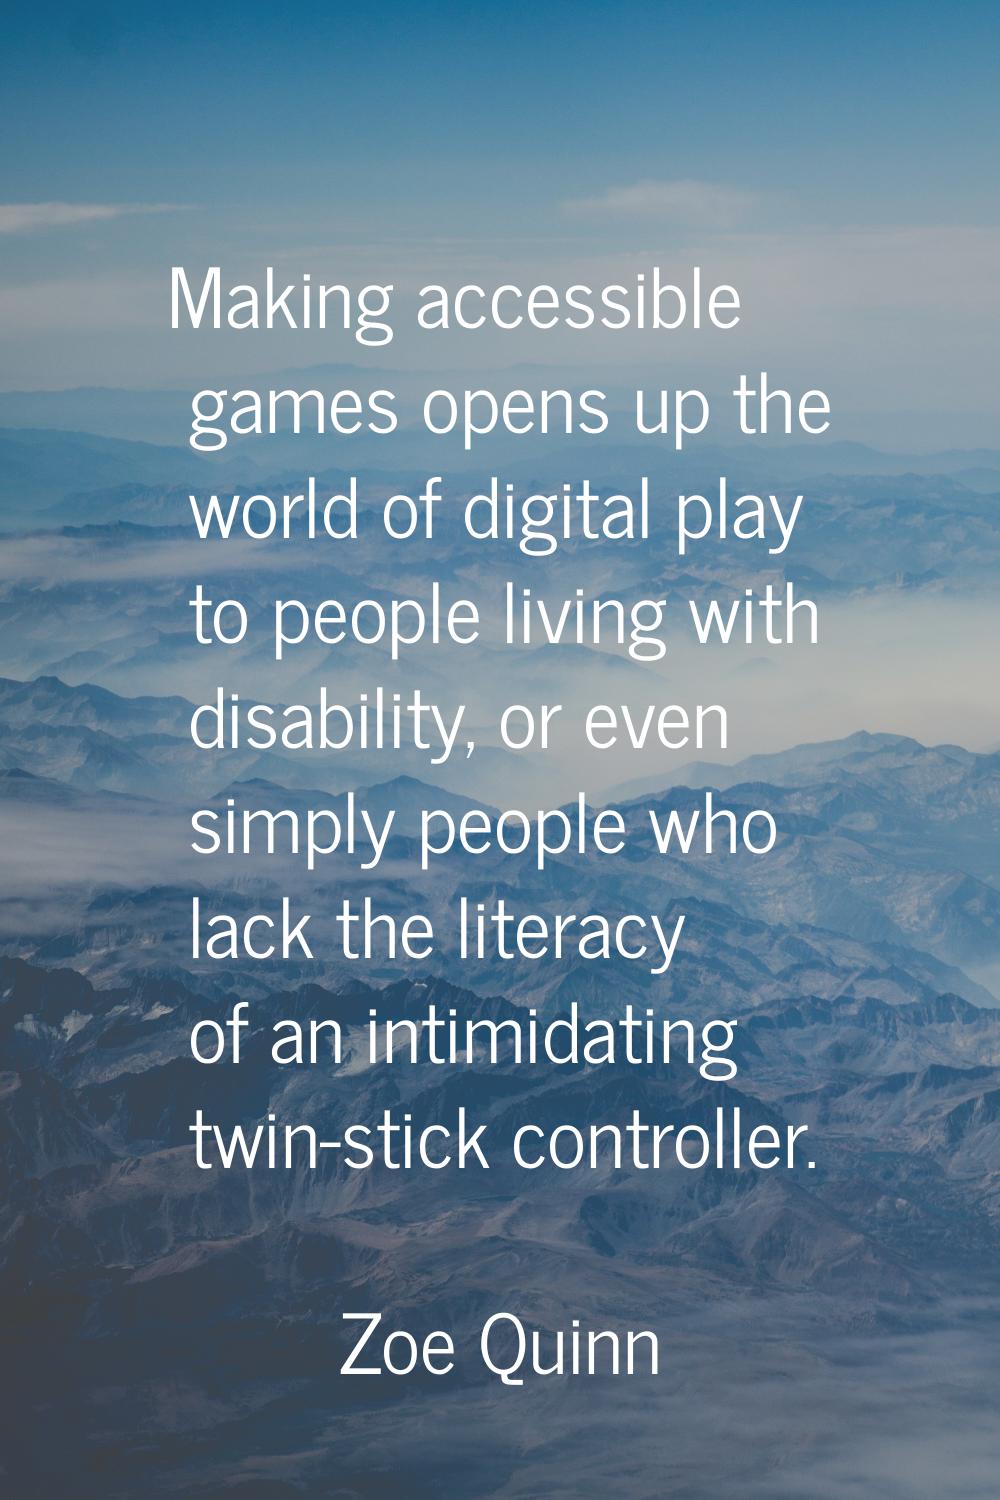 Making accessible games opens up the world of digital play to people living with disability, or eve